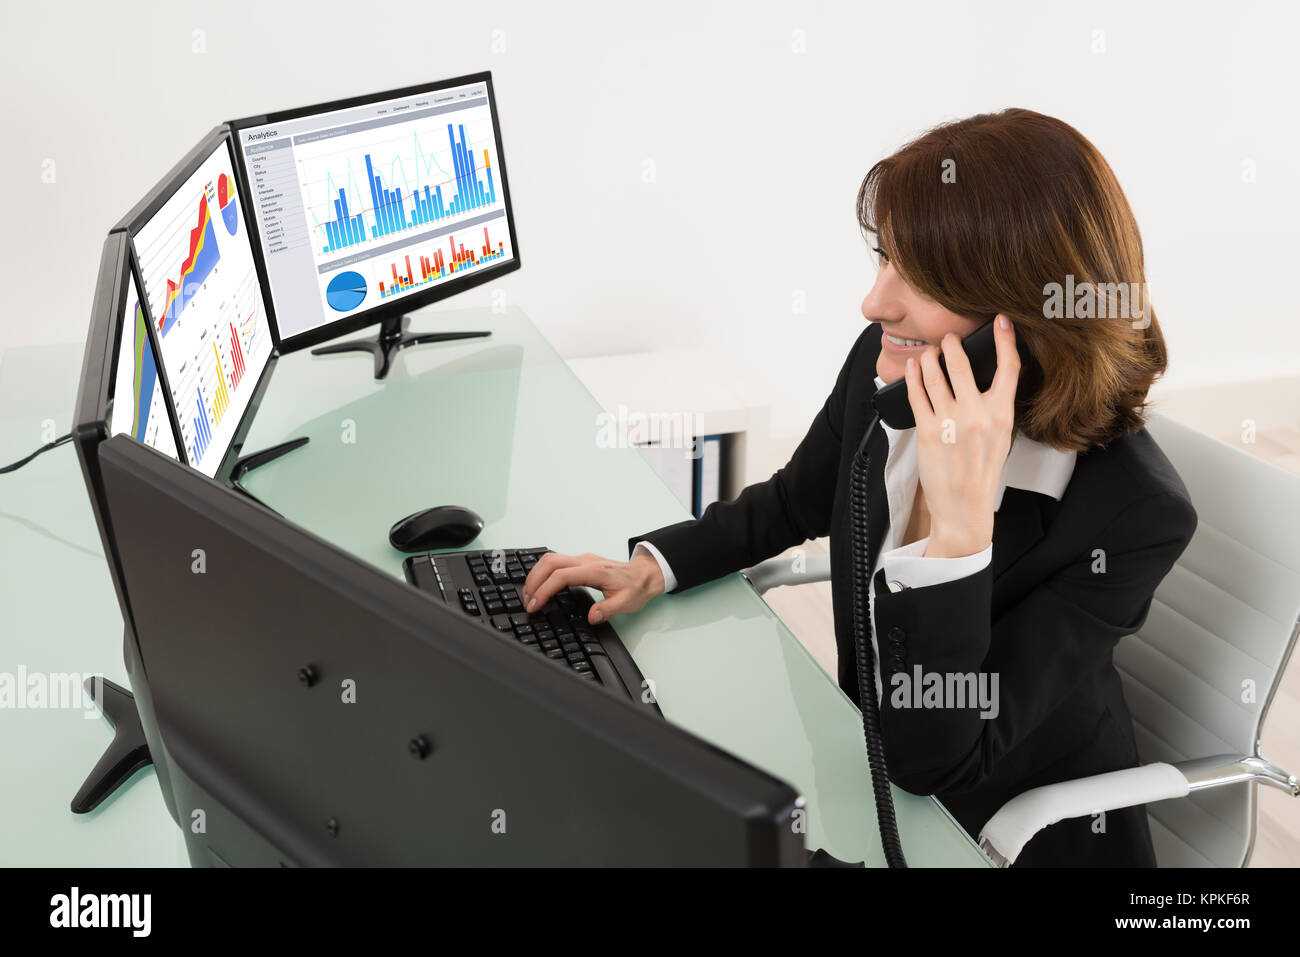 Businesswoman Analyzing Graphs On Multiple Computers Stock Photo